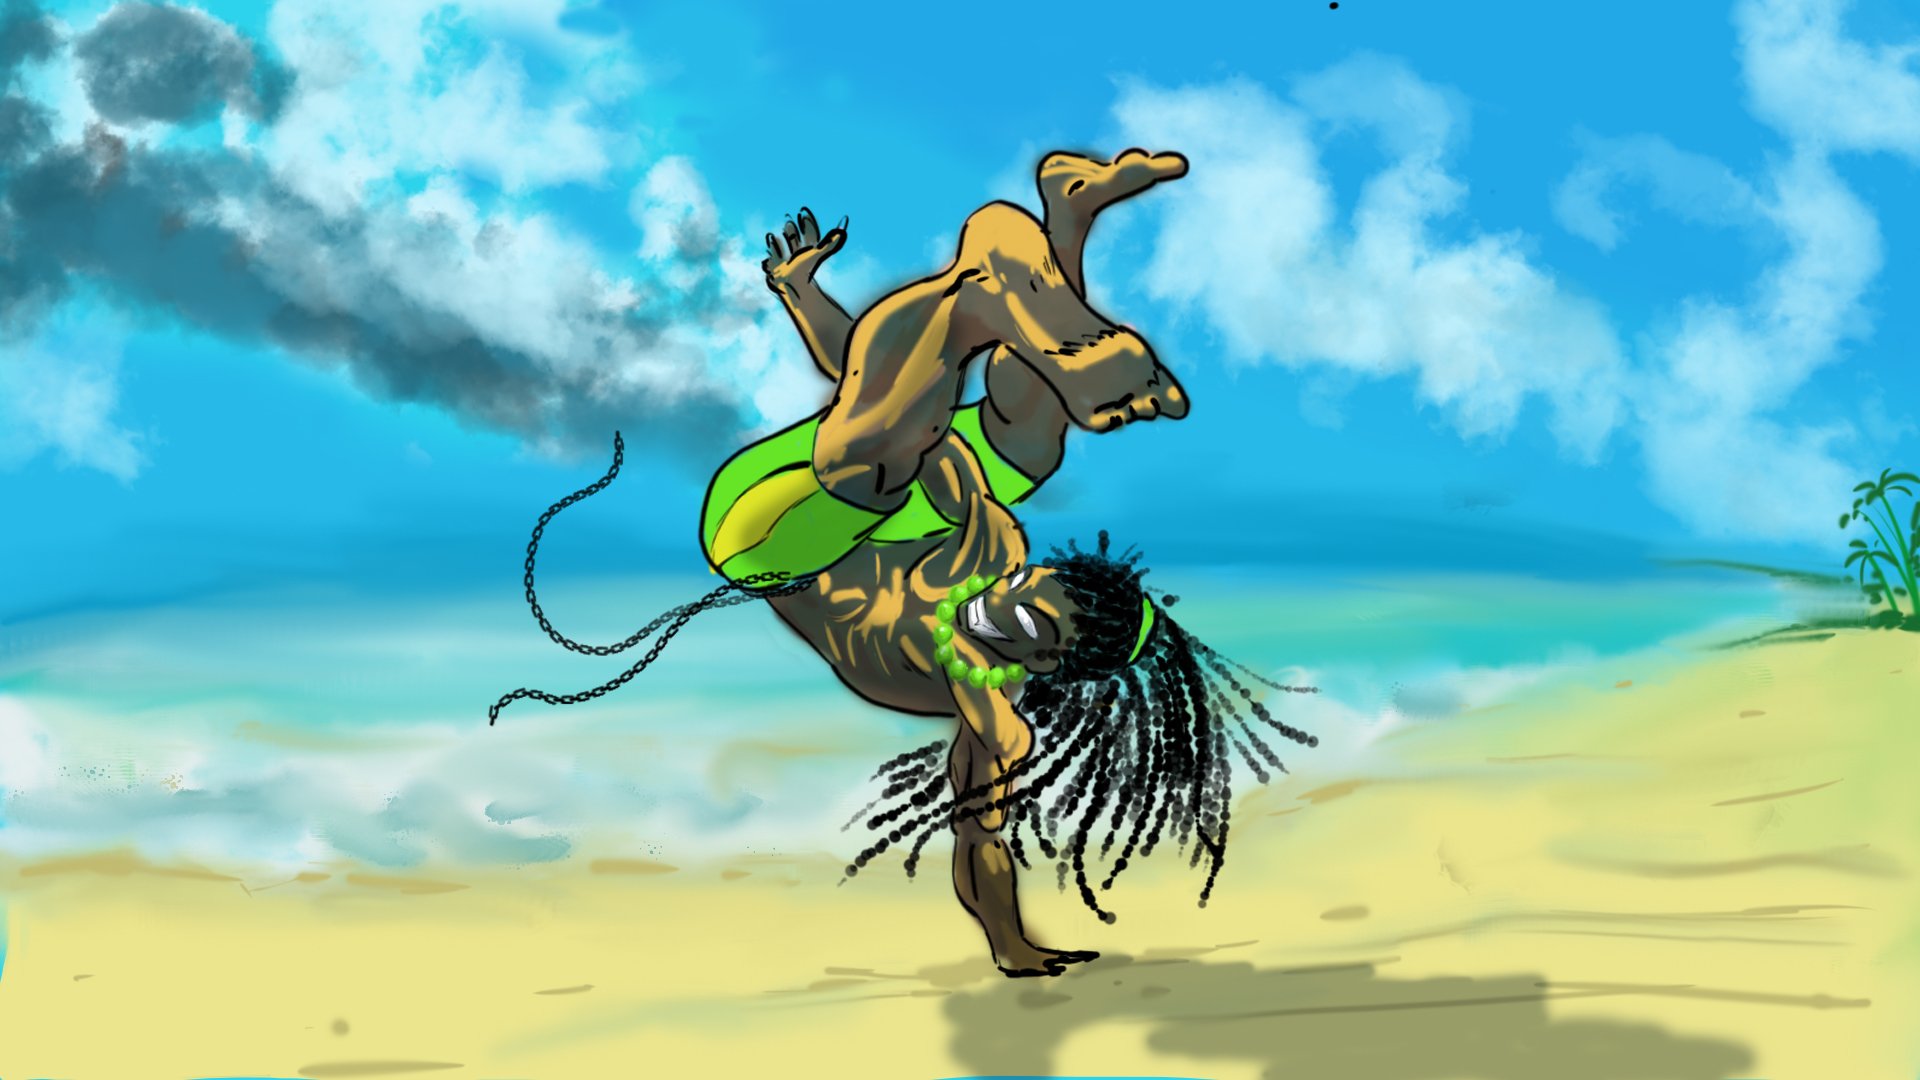 CAPOEIRA FIGHTER 3 ONLINE free online game on Miniplay.com